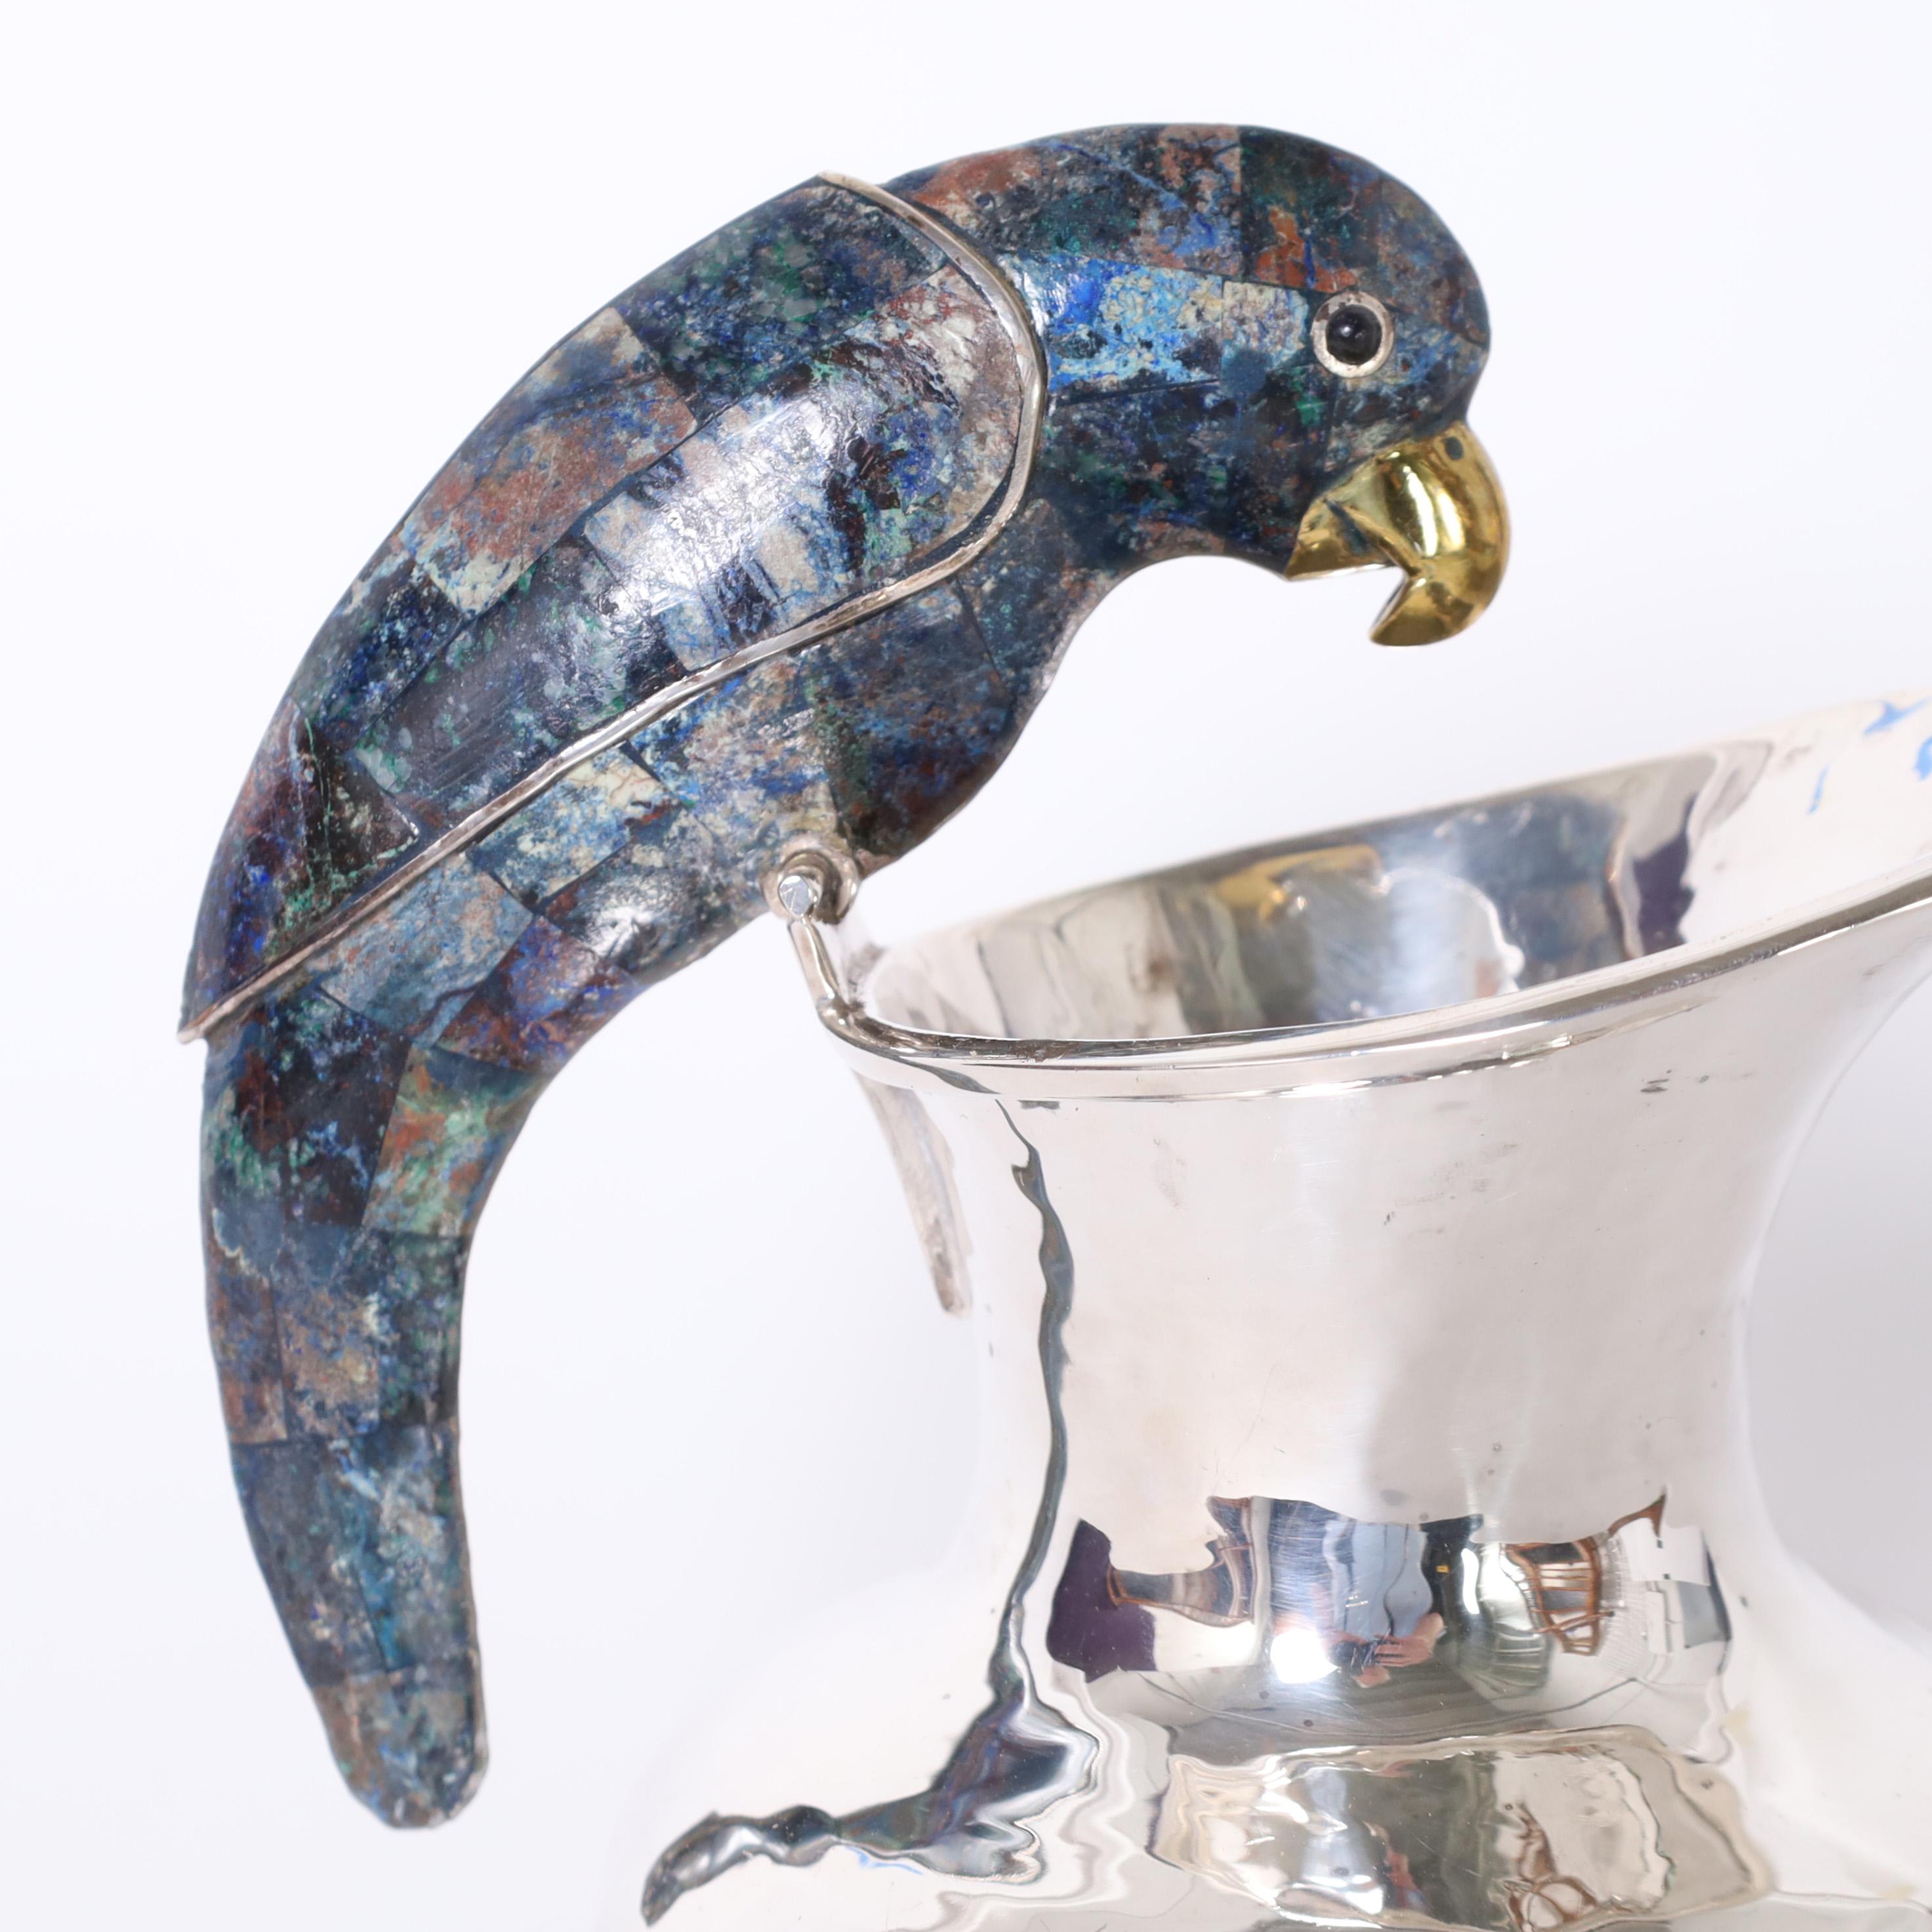 Plated Vintage Silver Plate Pitcher with Parrot by Los Castillo